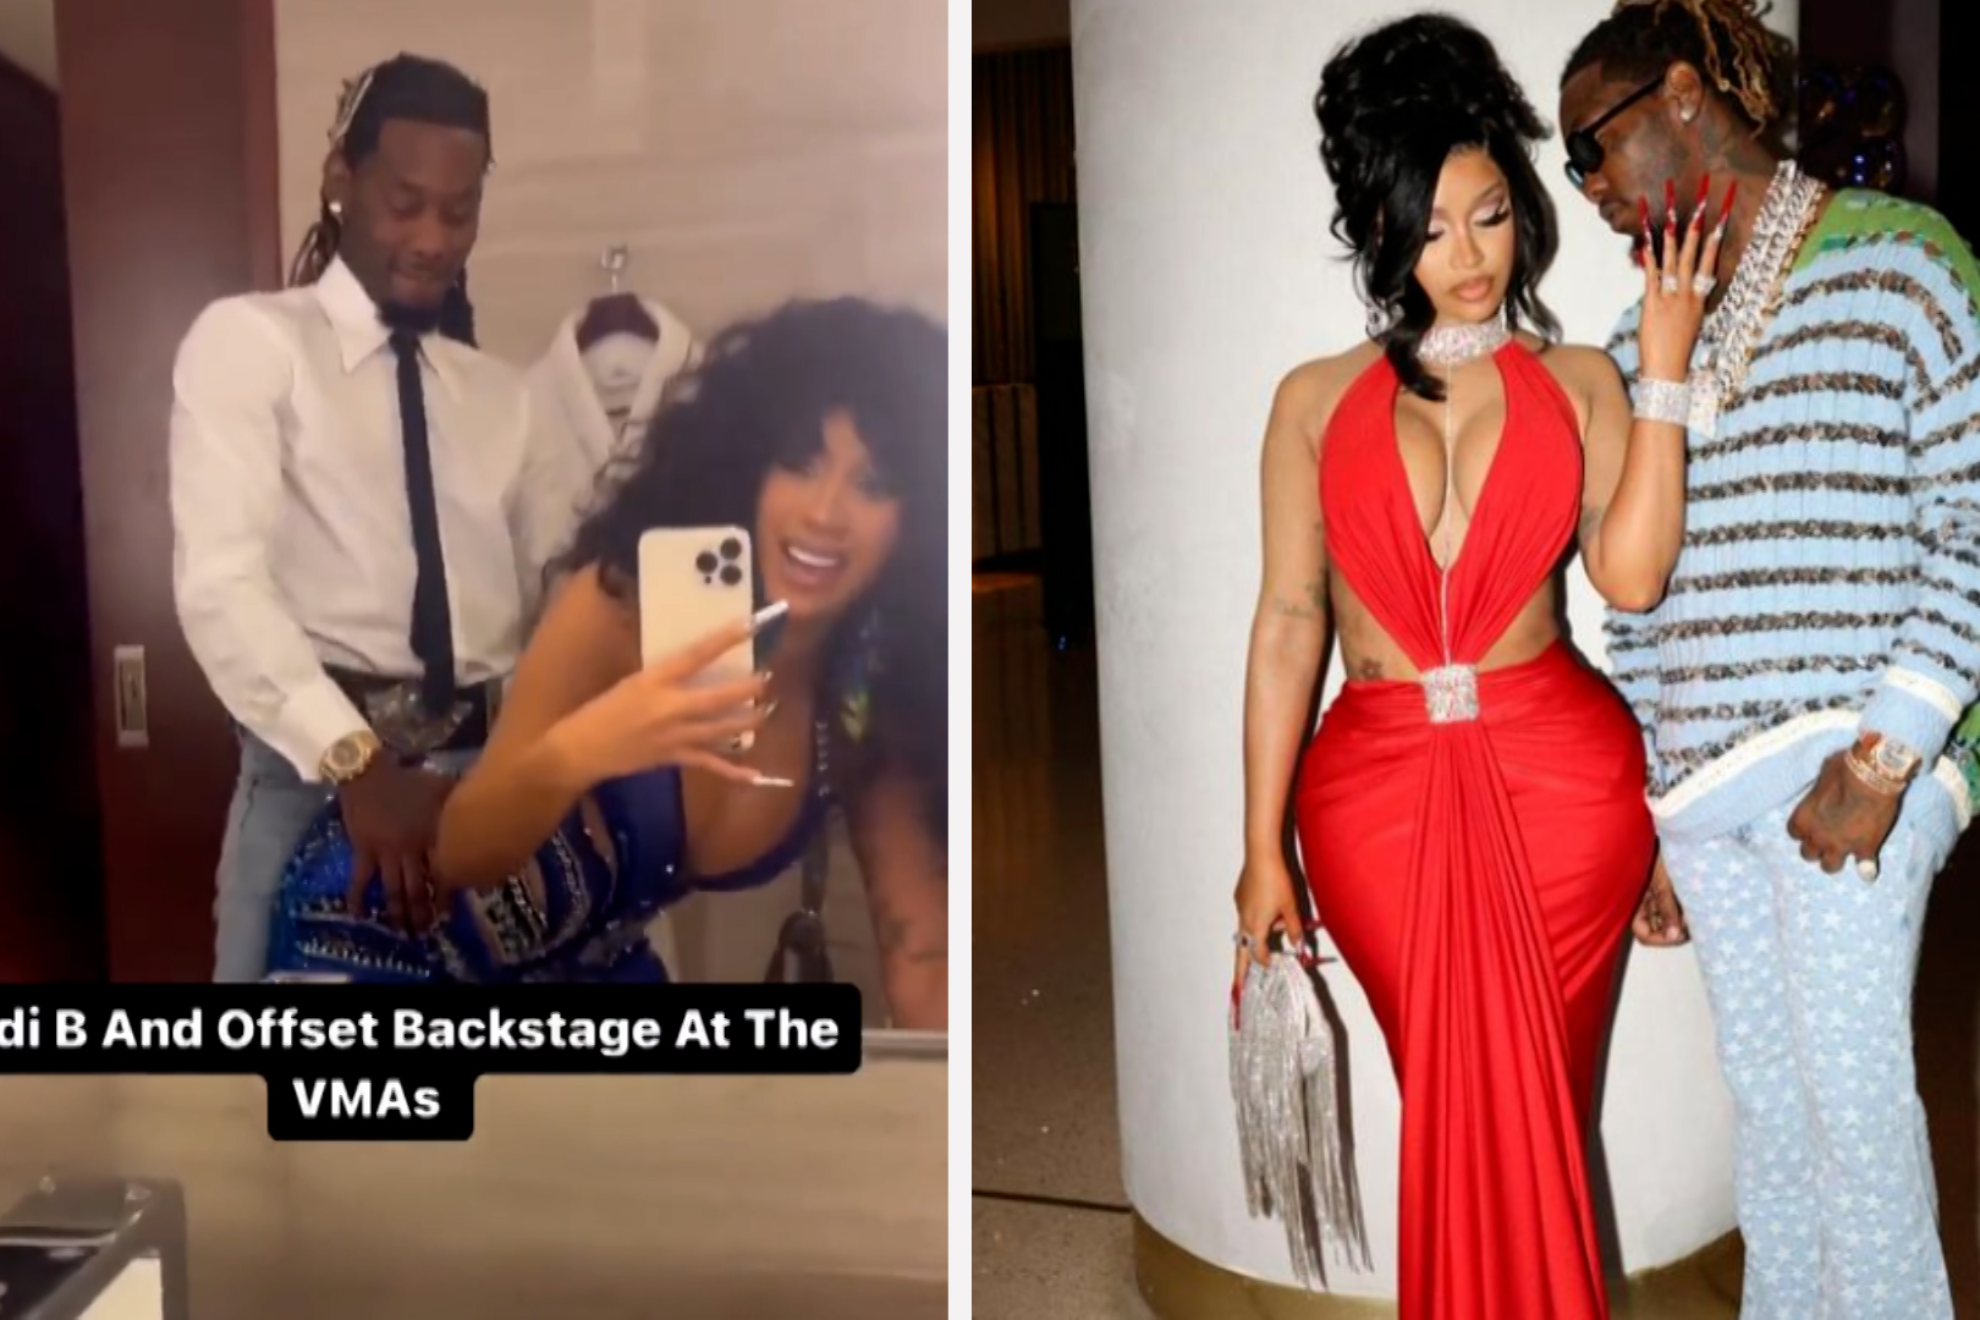 Cardi B and Offset simulate sex position in viral VMAs bathroom video